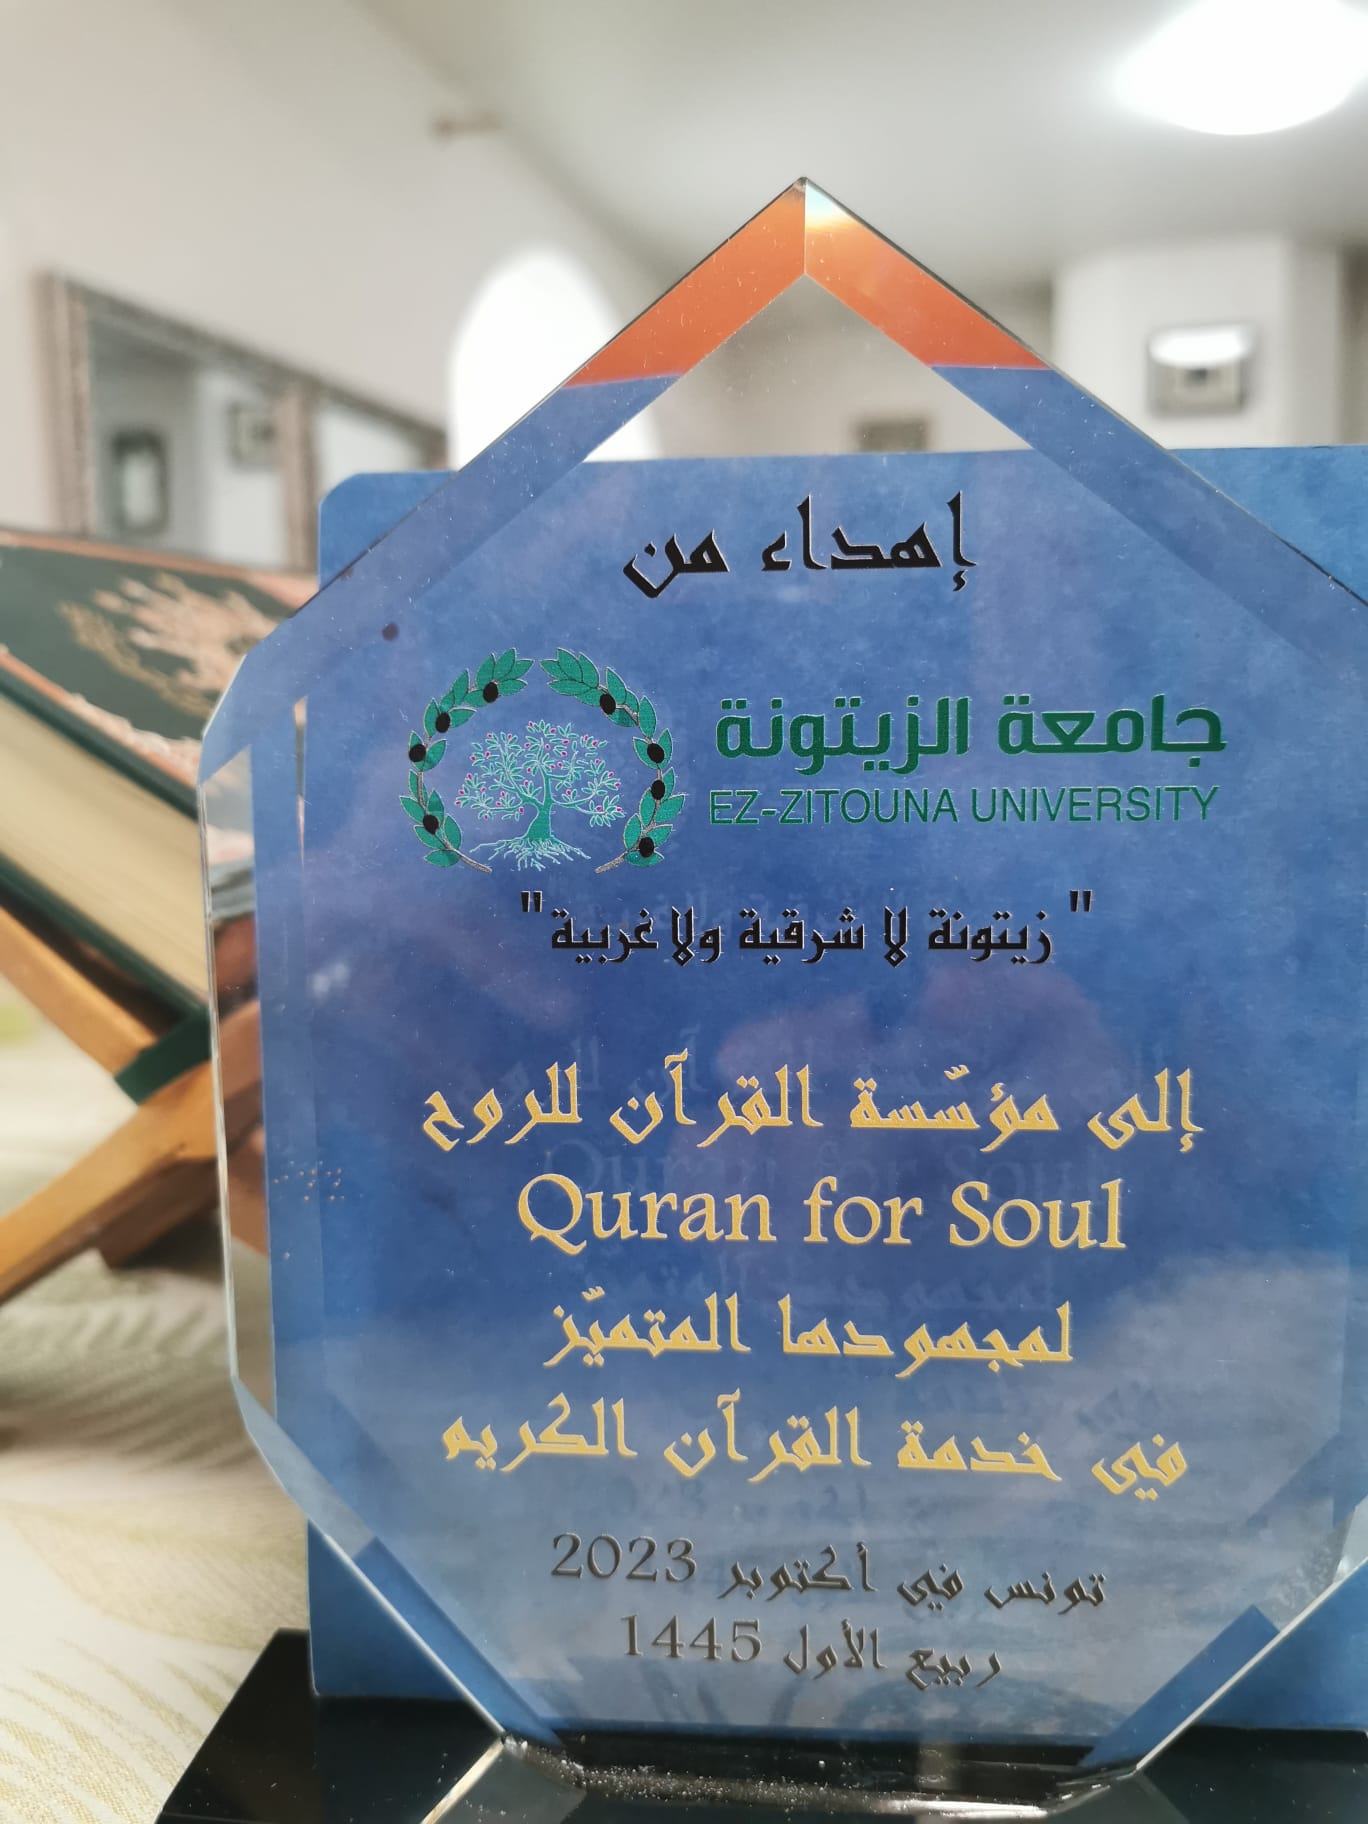 QuranForSoul Foundation Honored by Ezzeitouna University for its Commitment to the Holy Quran, Upholding the University's Illustrious Tradition Quran Coran